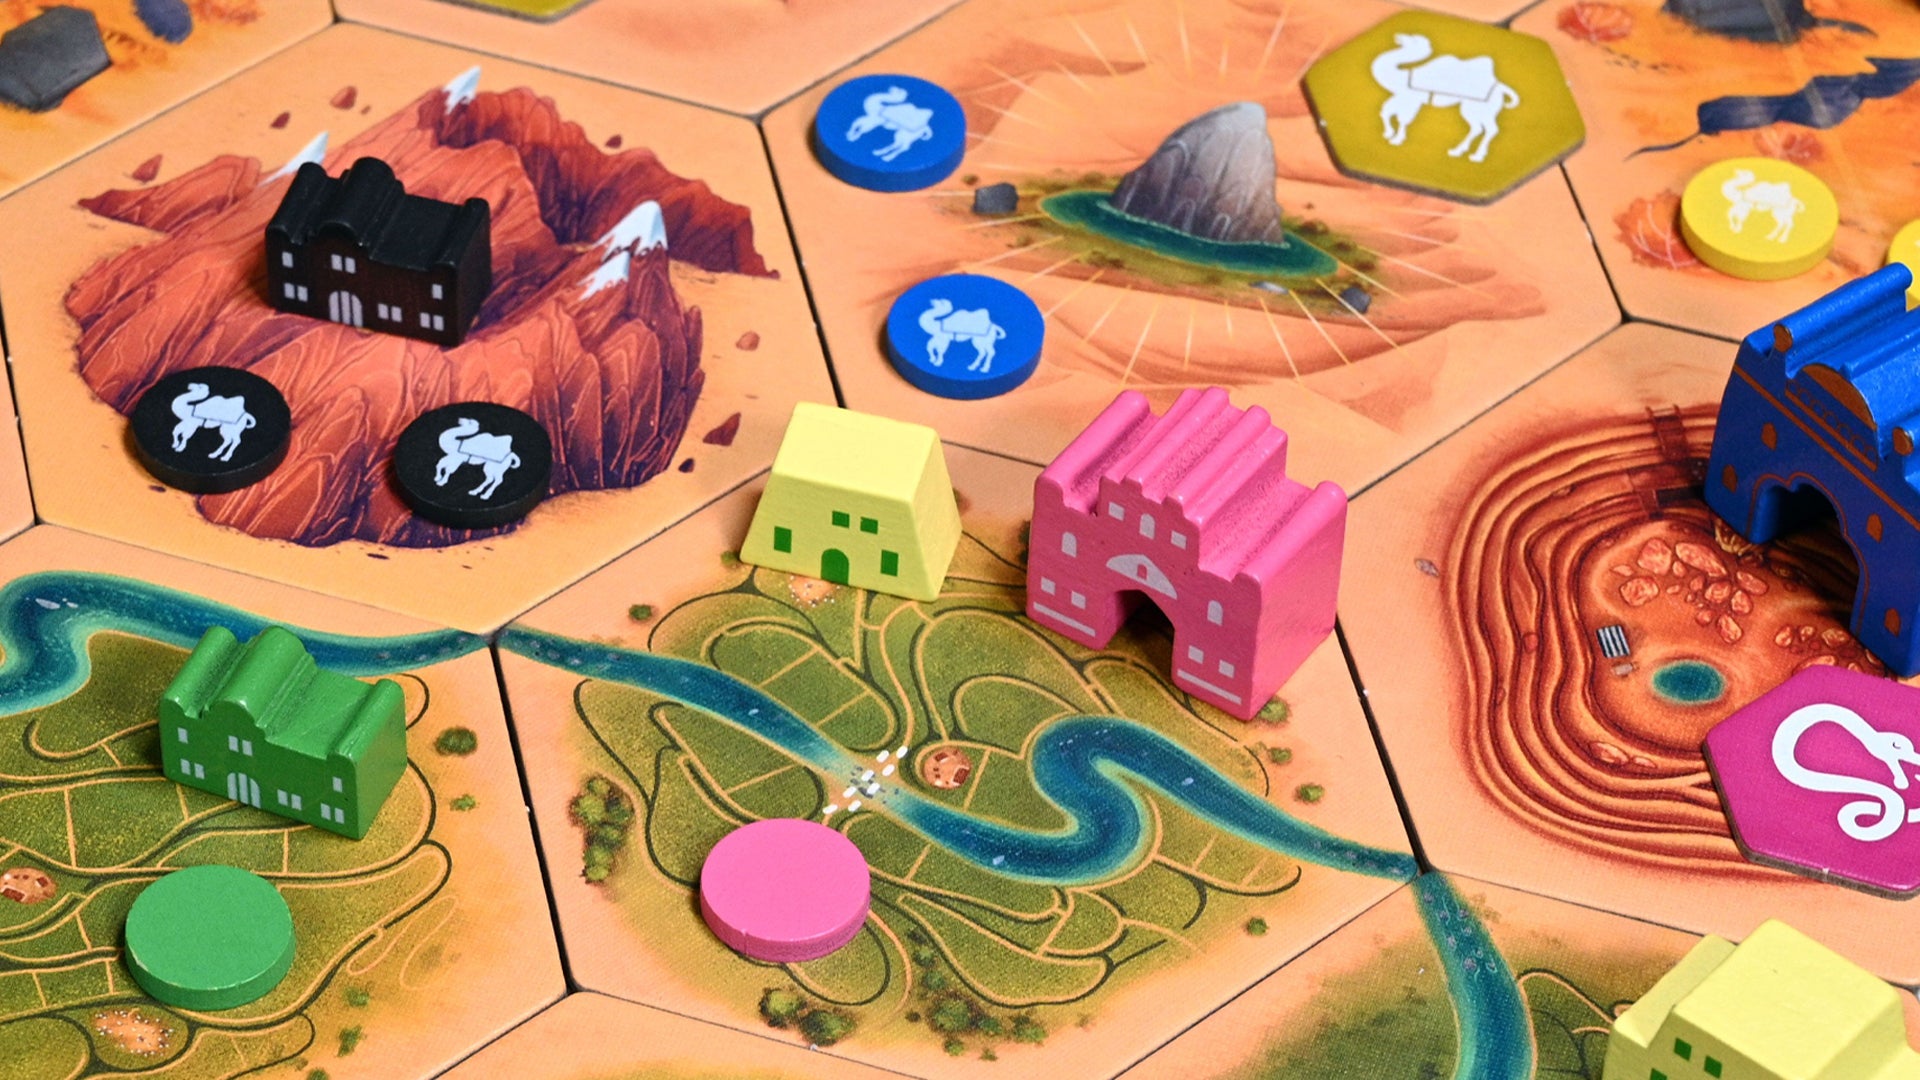 A close-up image of Crescent Moon gameplay, showing wooden tokens and pieces on cardboard hex tiles